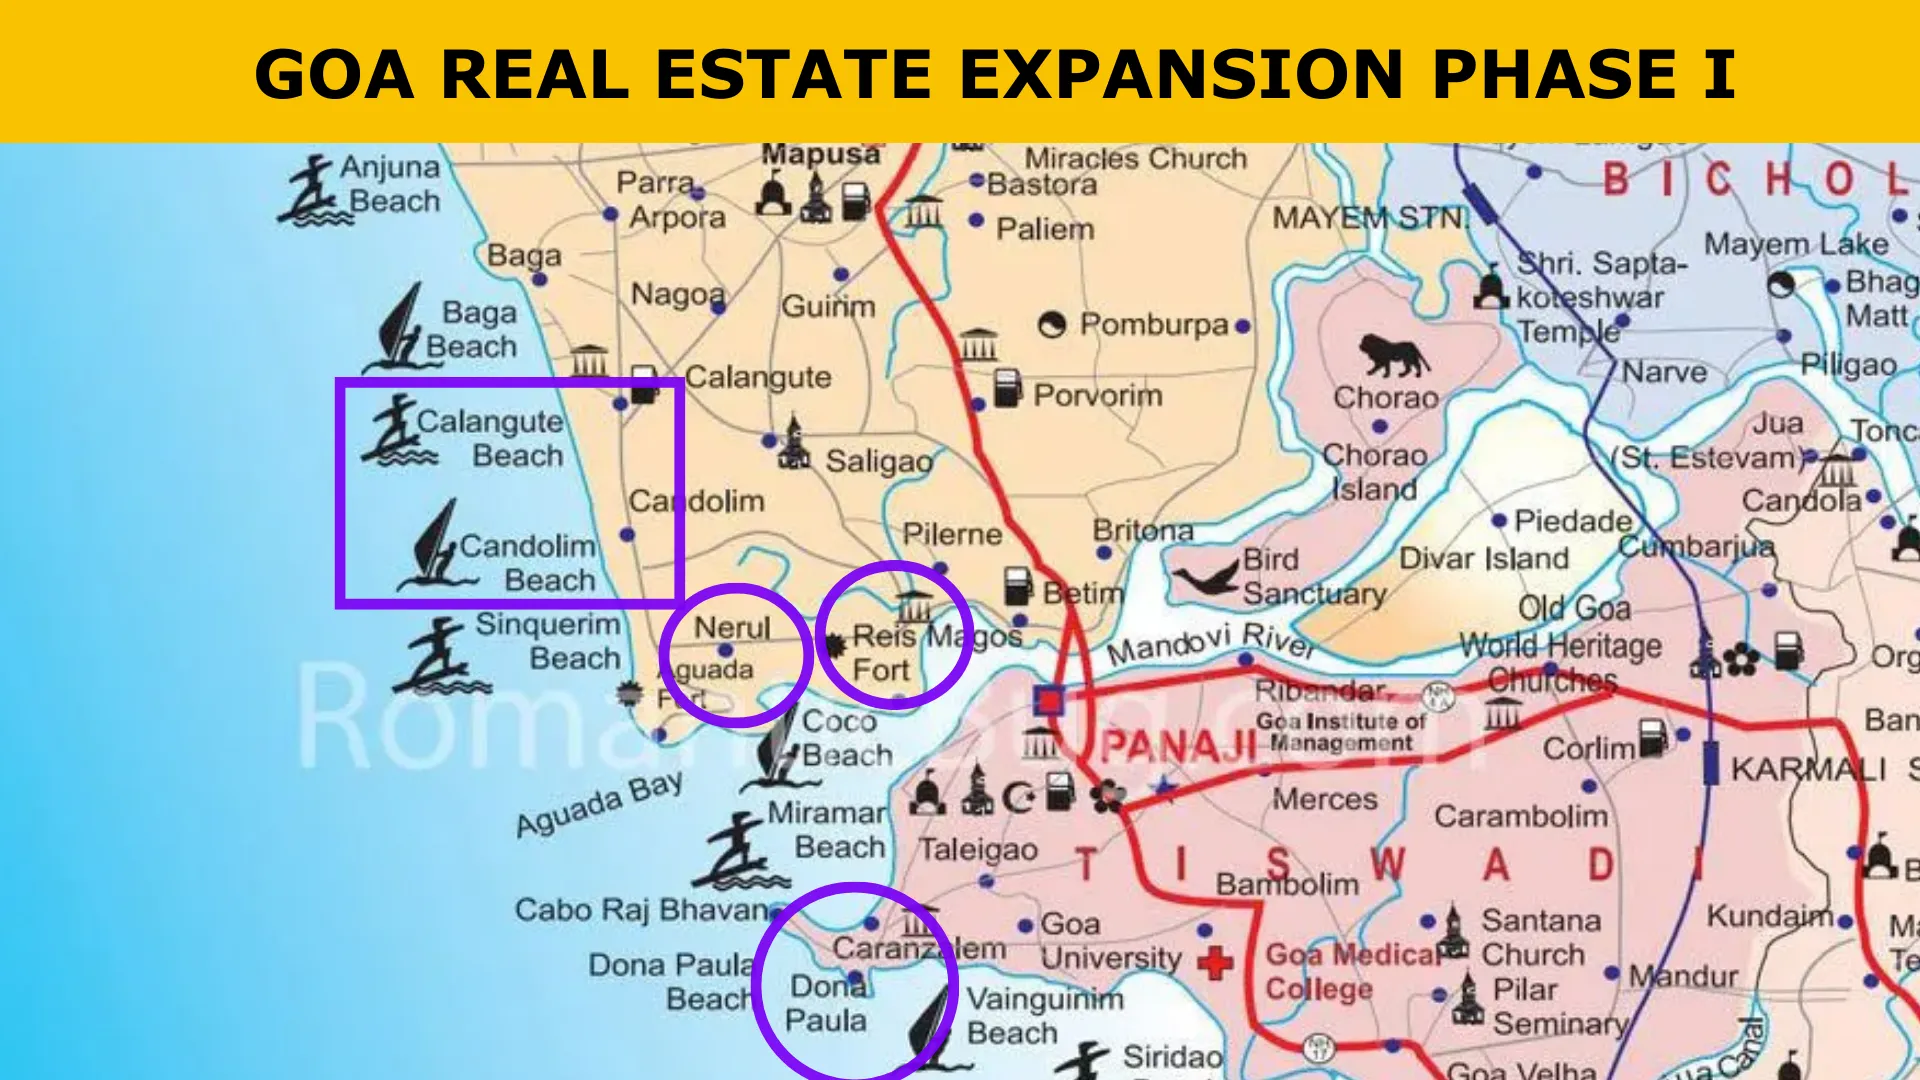 Phase 1 of Goa Real Estate Expansion